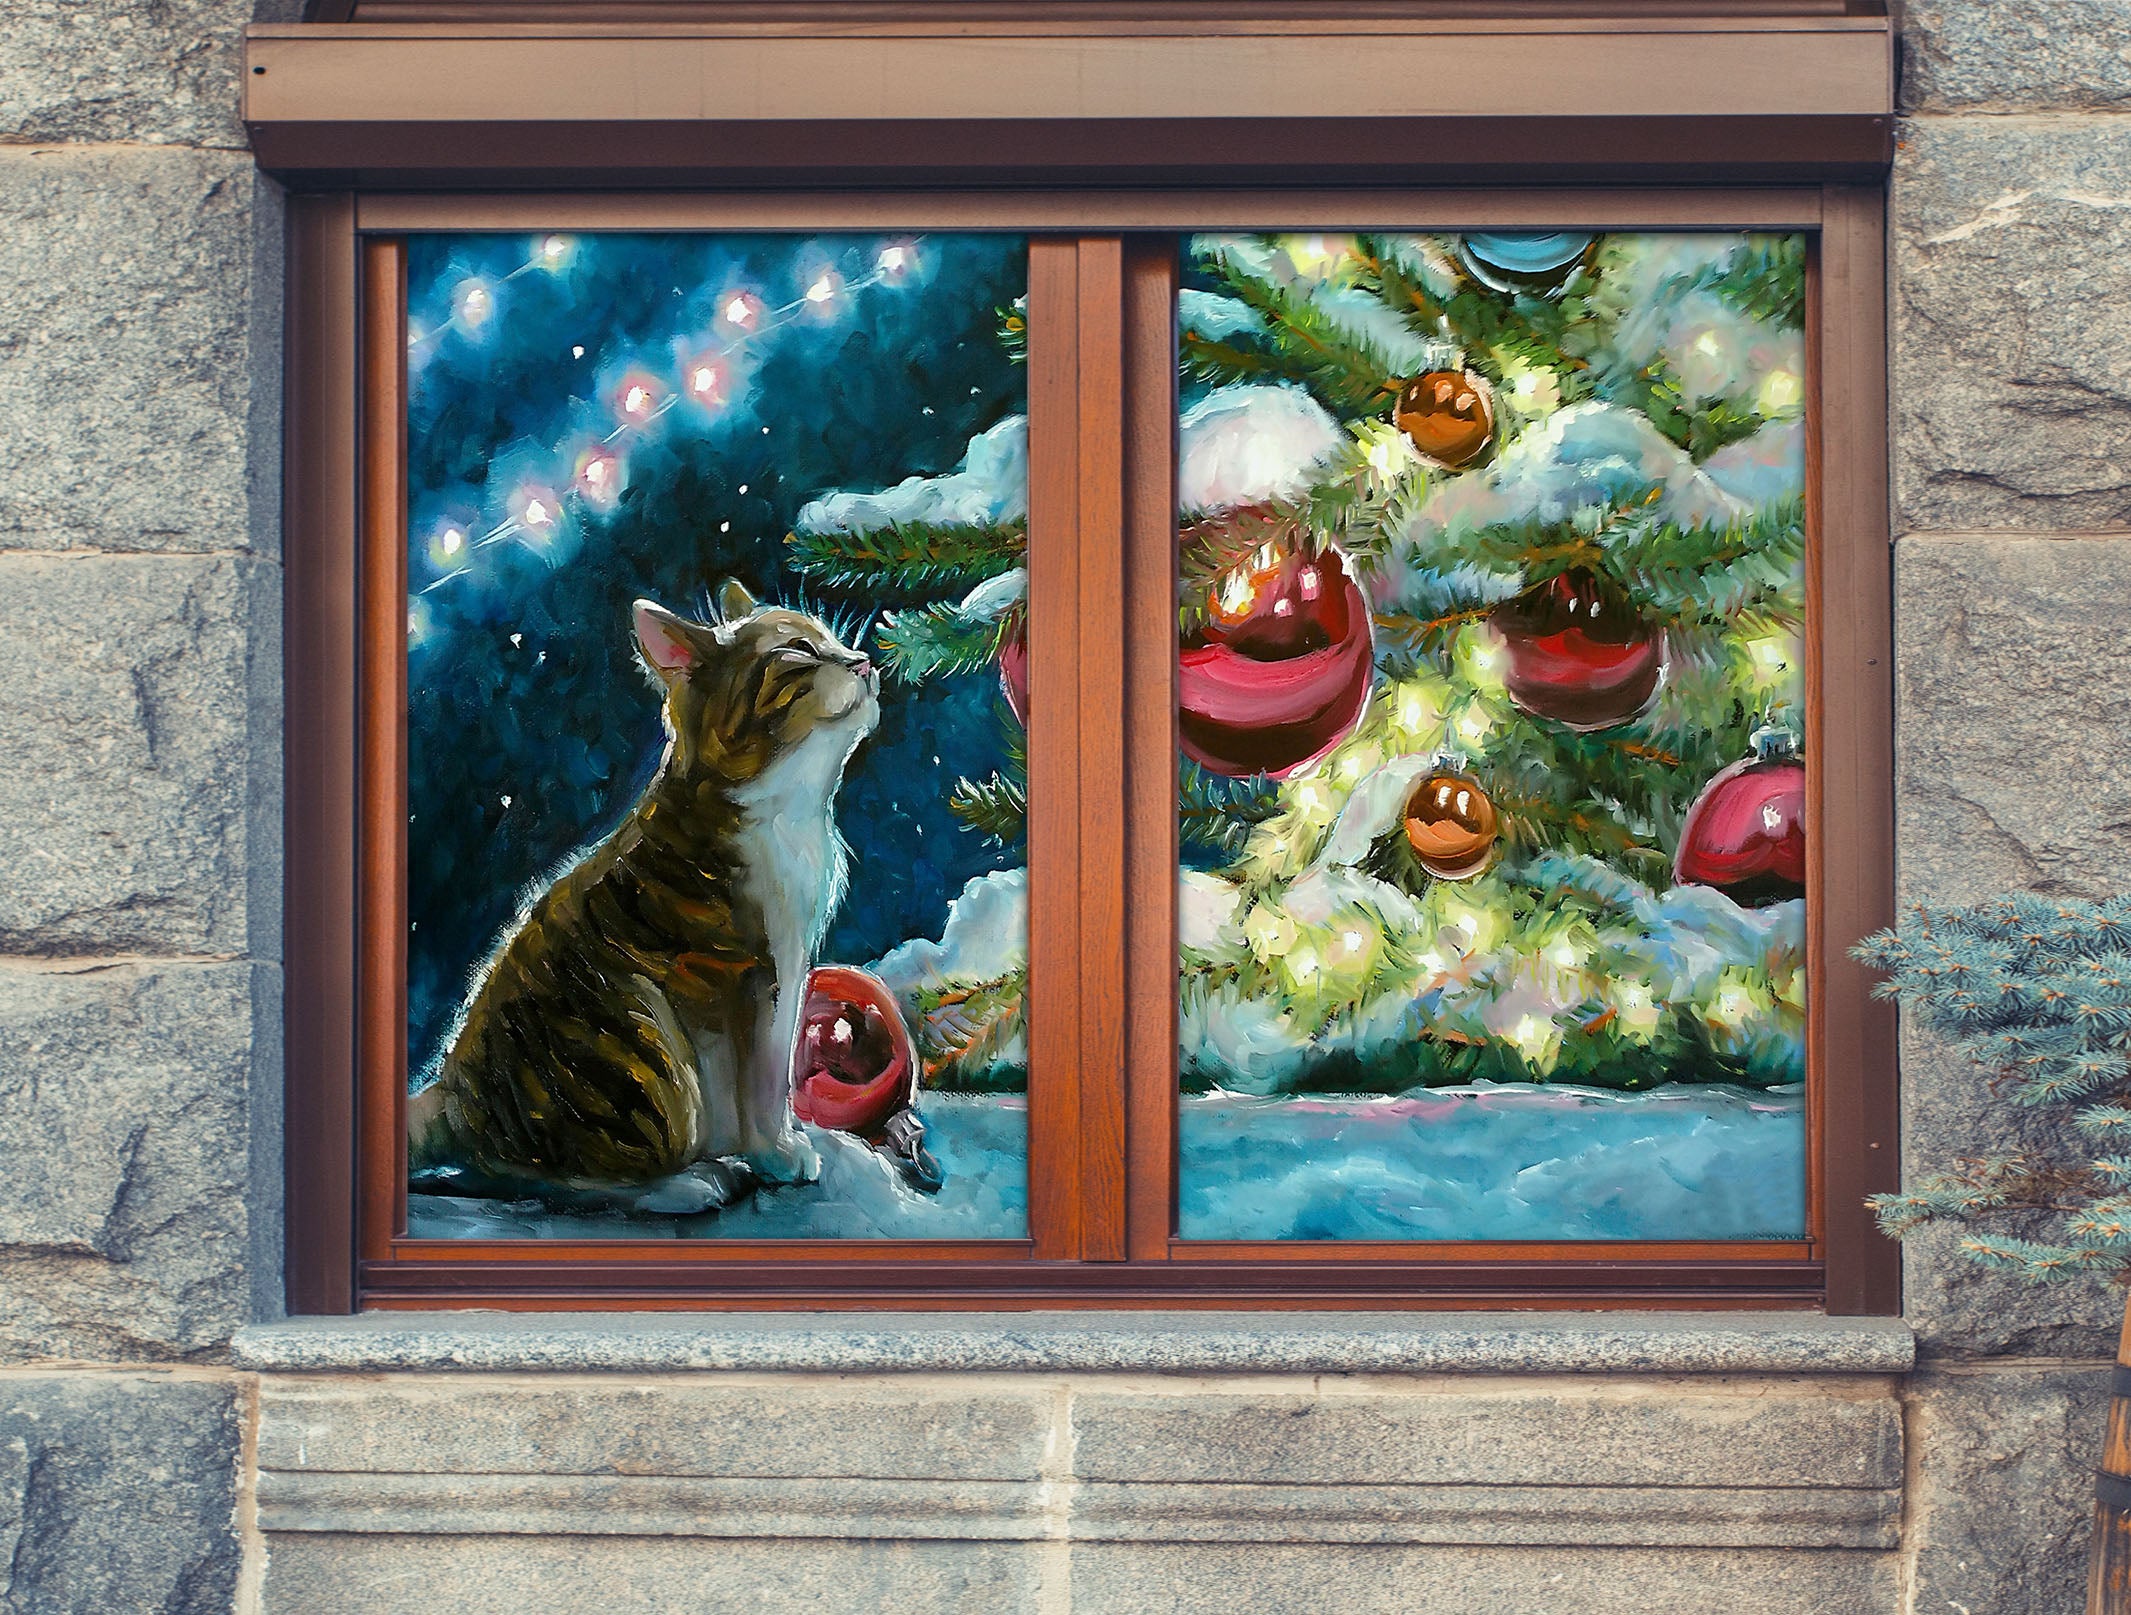 3D Kitten Christmas Tree 43031 Christmas Window Film Print Sticker Cling Stained Glass Xmas